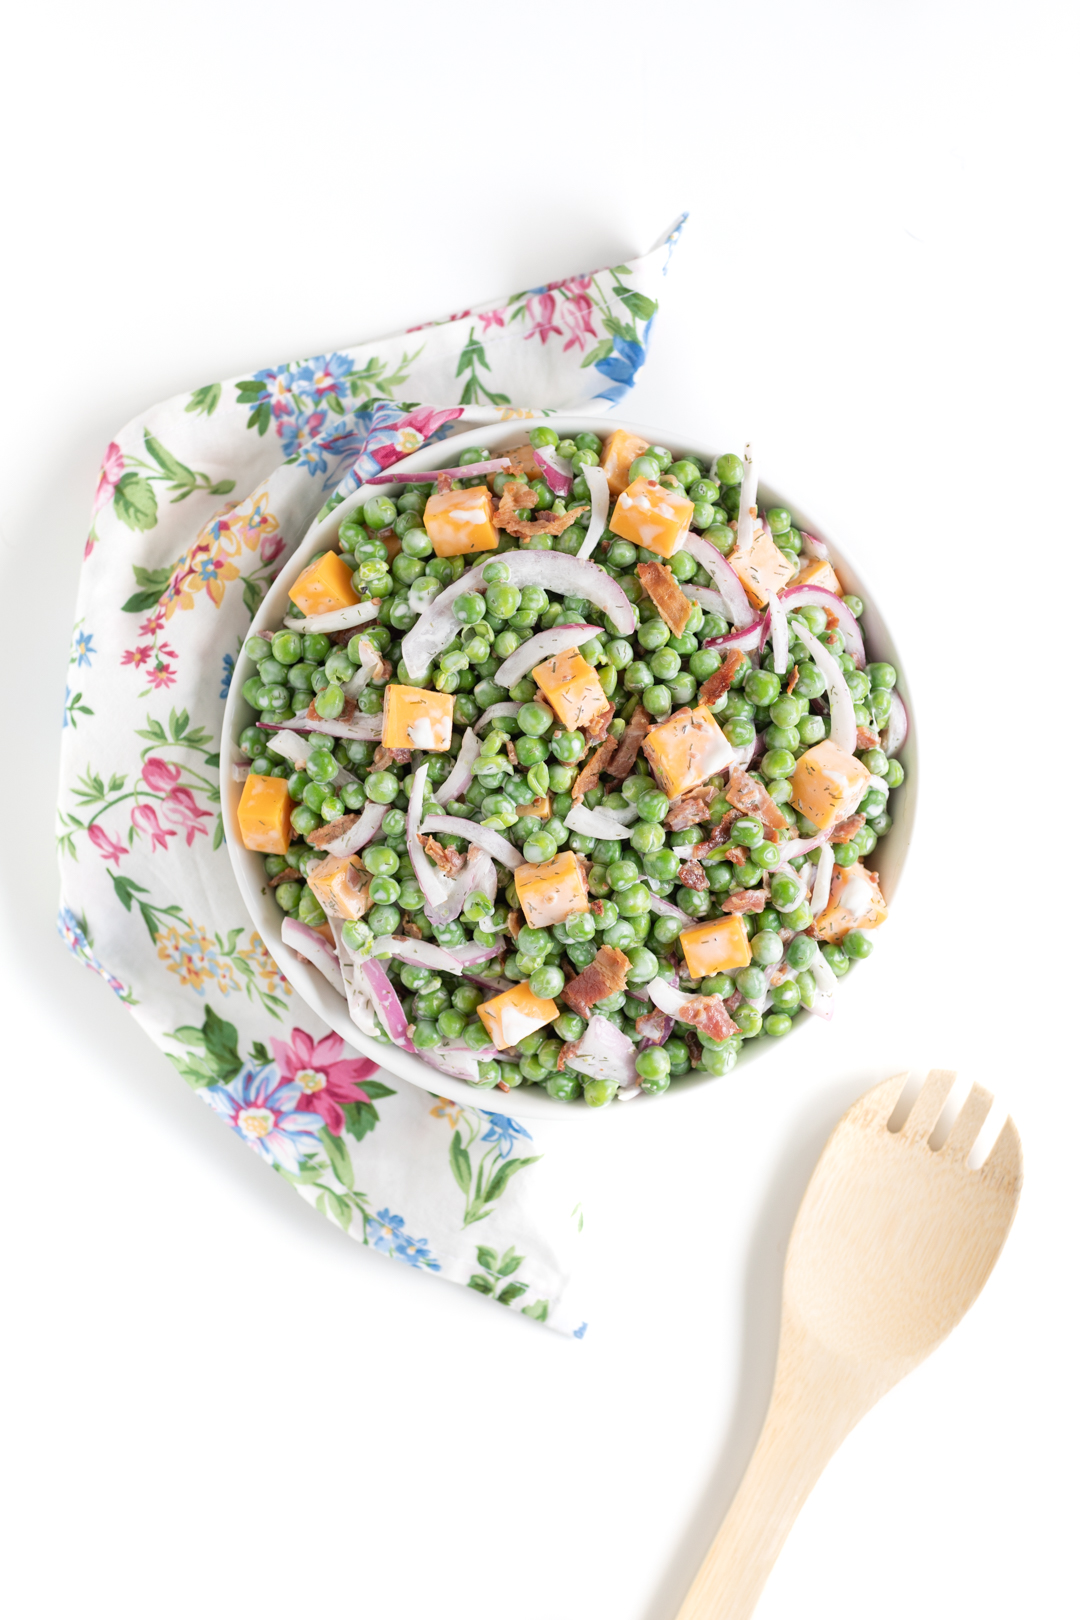 pea salad with bacon, cheese chunks and slivered onions served in a white bowl with floral napkin and serving spoon nearby